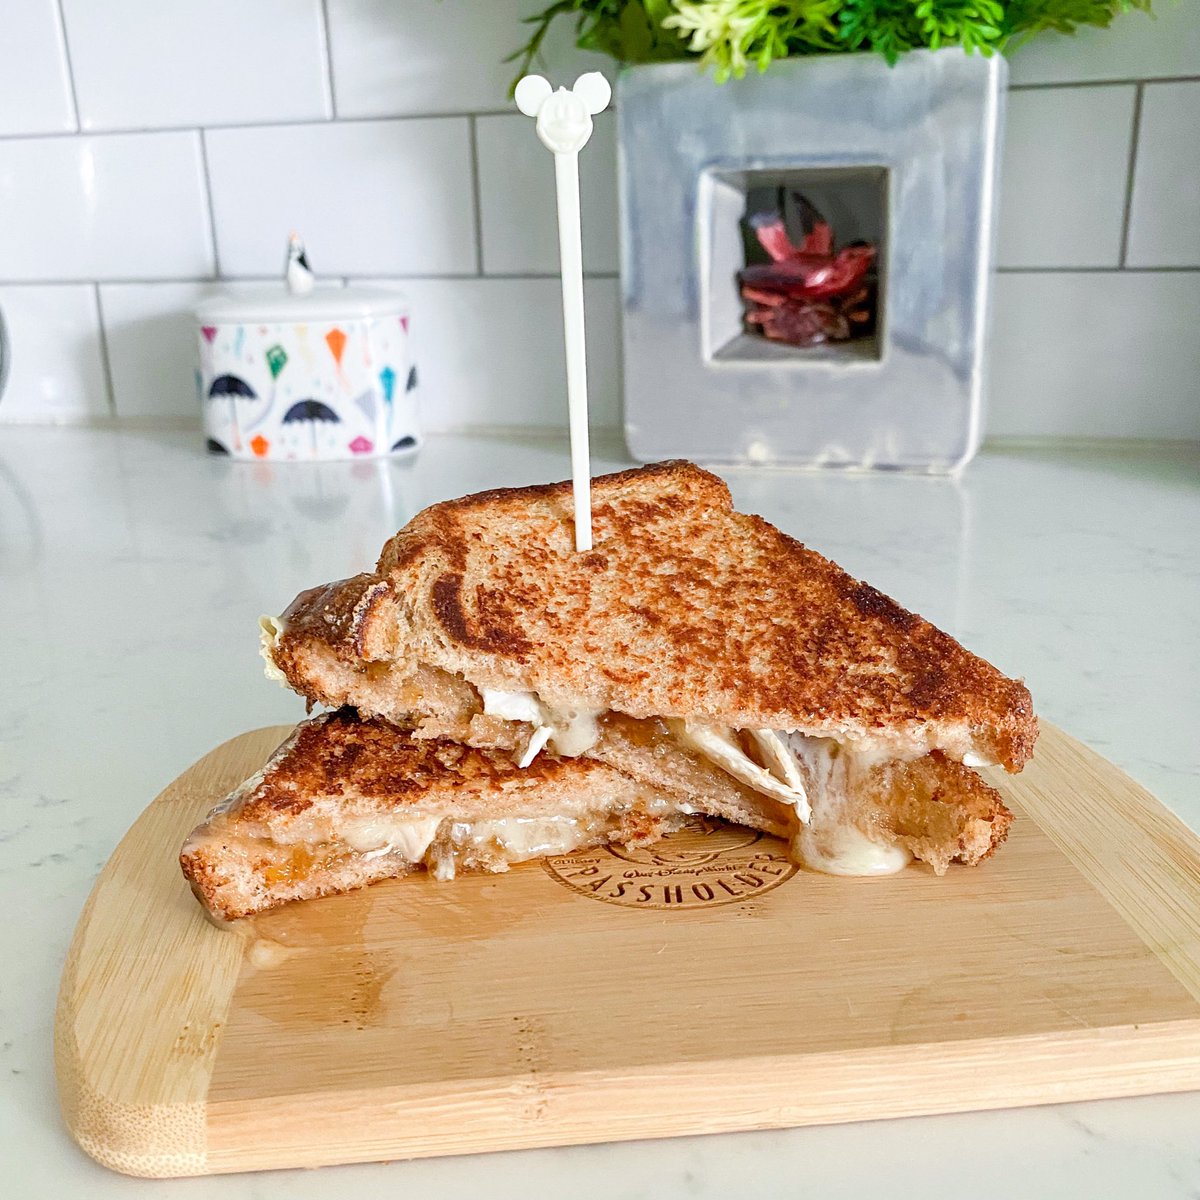 Deliciously gooey special food item today!Camembert grilled cheese with fig preserves on wheat. Vegetarian friendly.